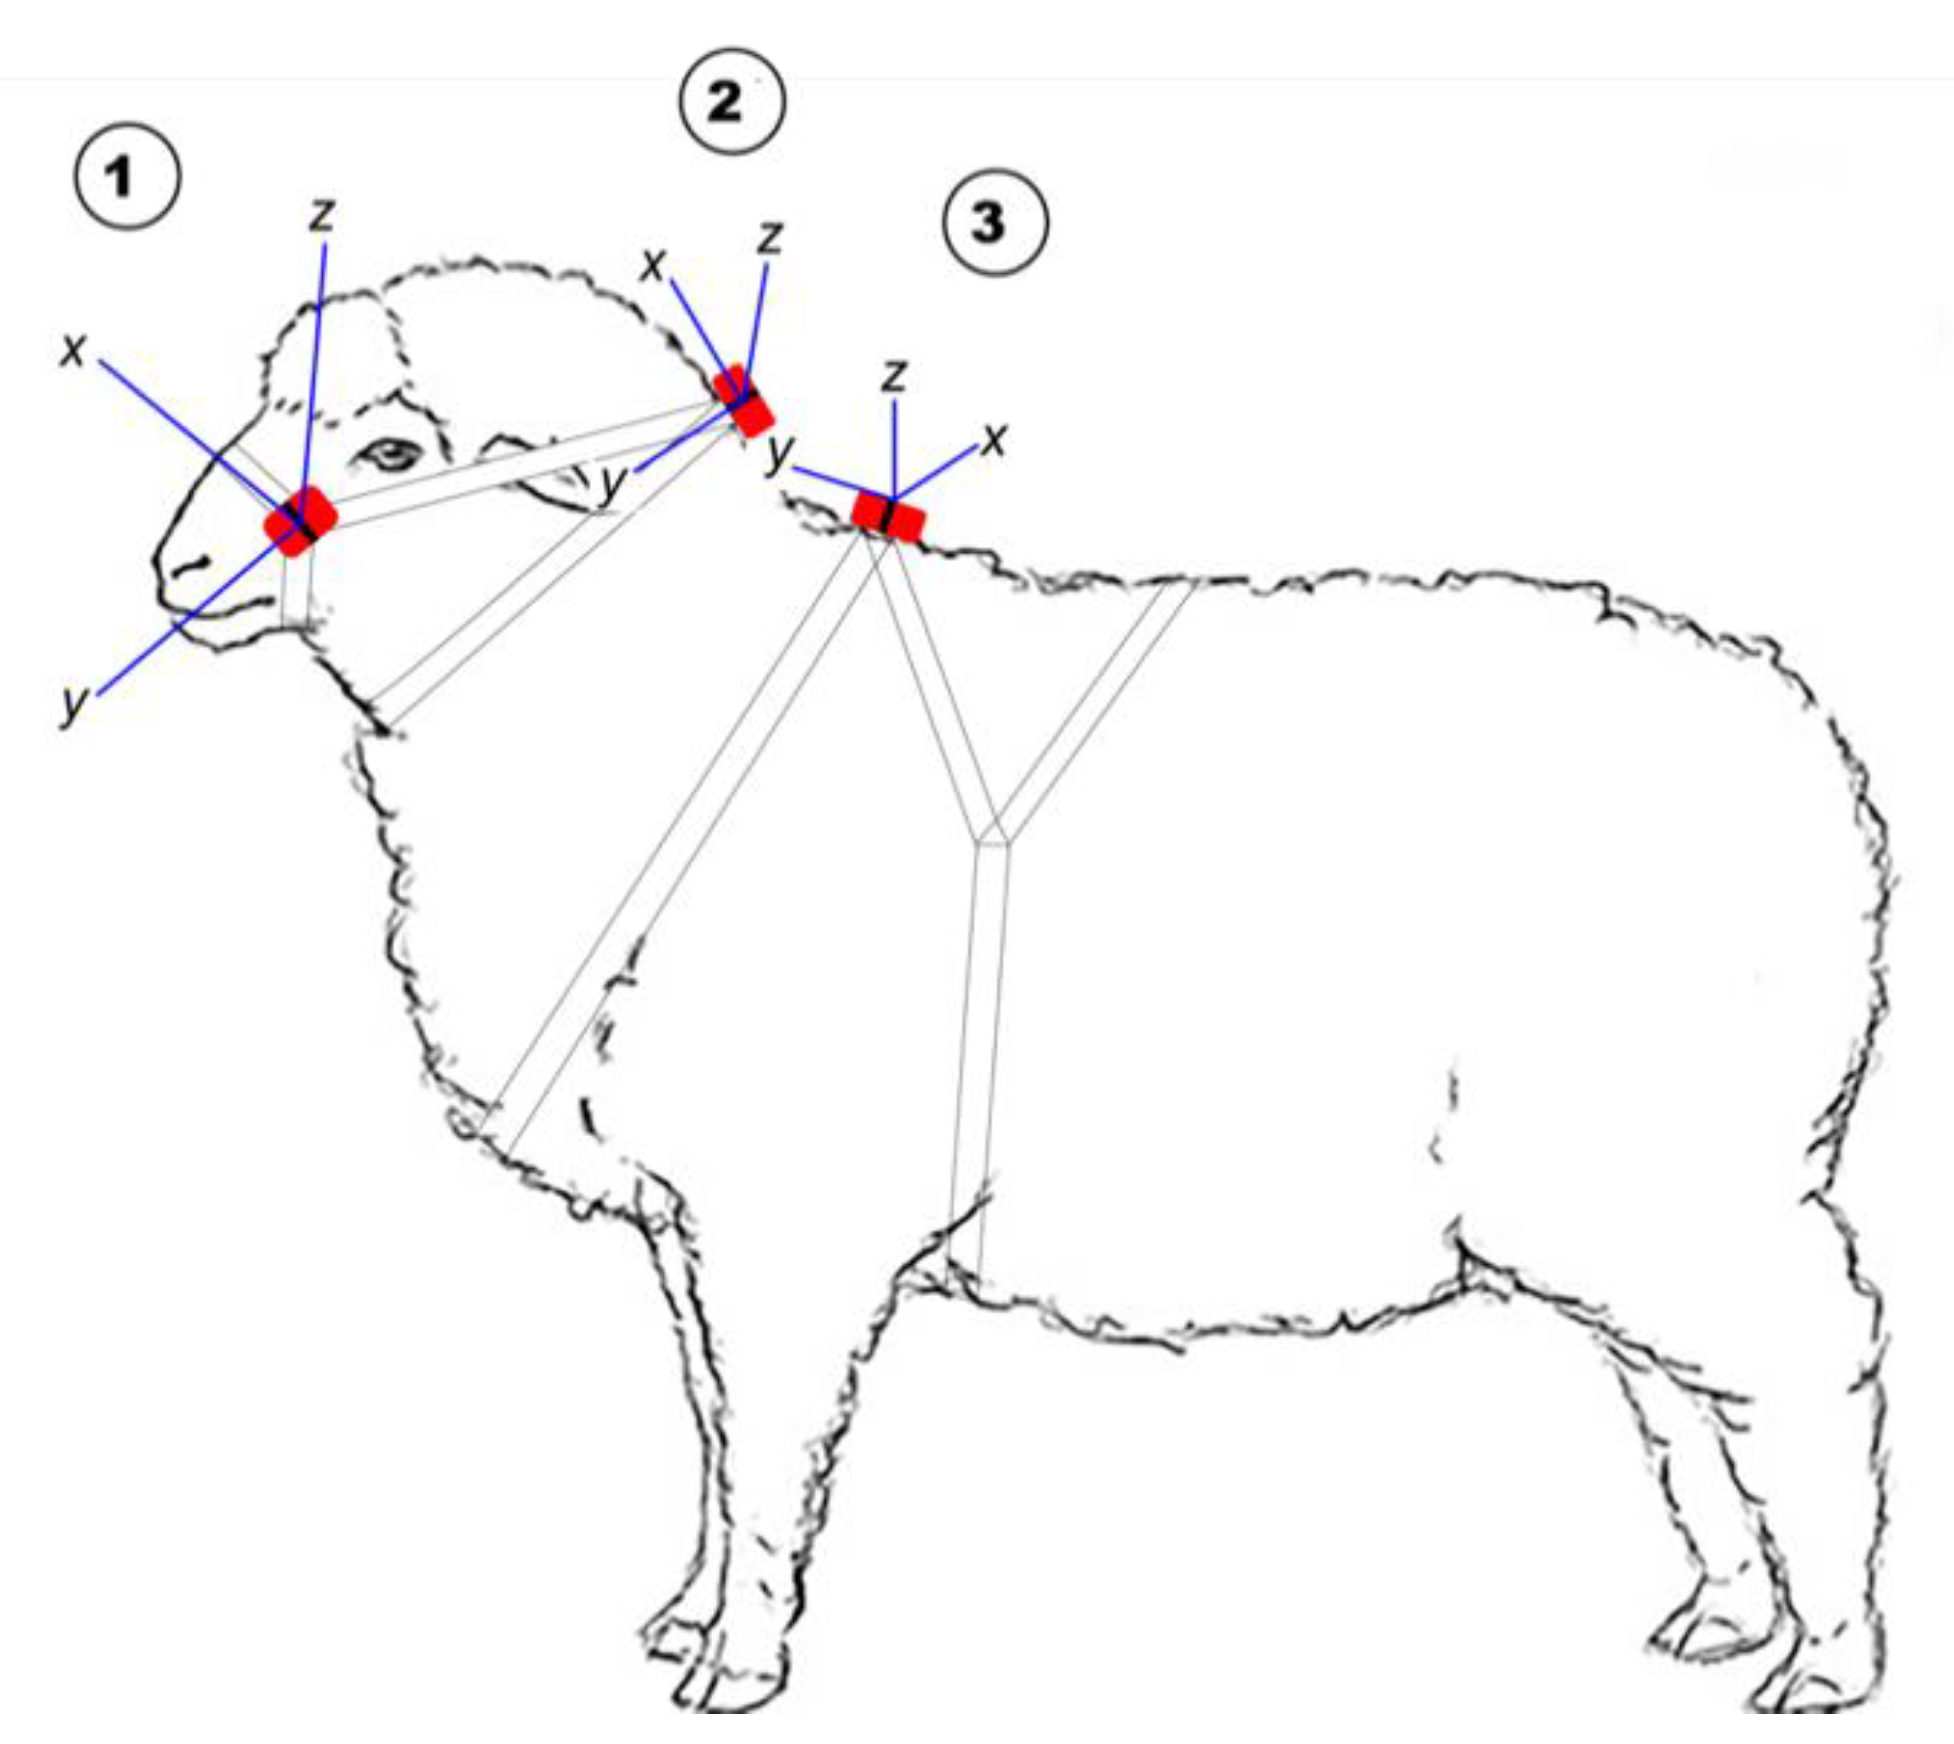 Sensors | Free Full-Text | What Are Sheep Doing? Tri-Axial Accelerometer  Sensor Data Identify the Diel Activity Pattern of Ewe Lambs on Pasture